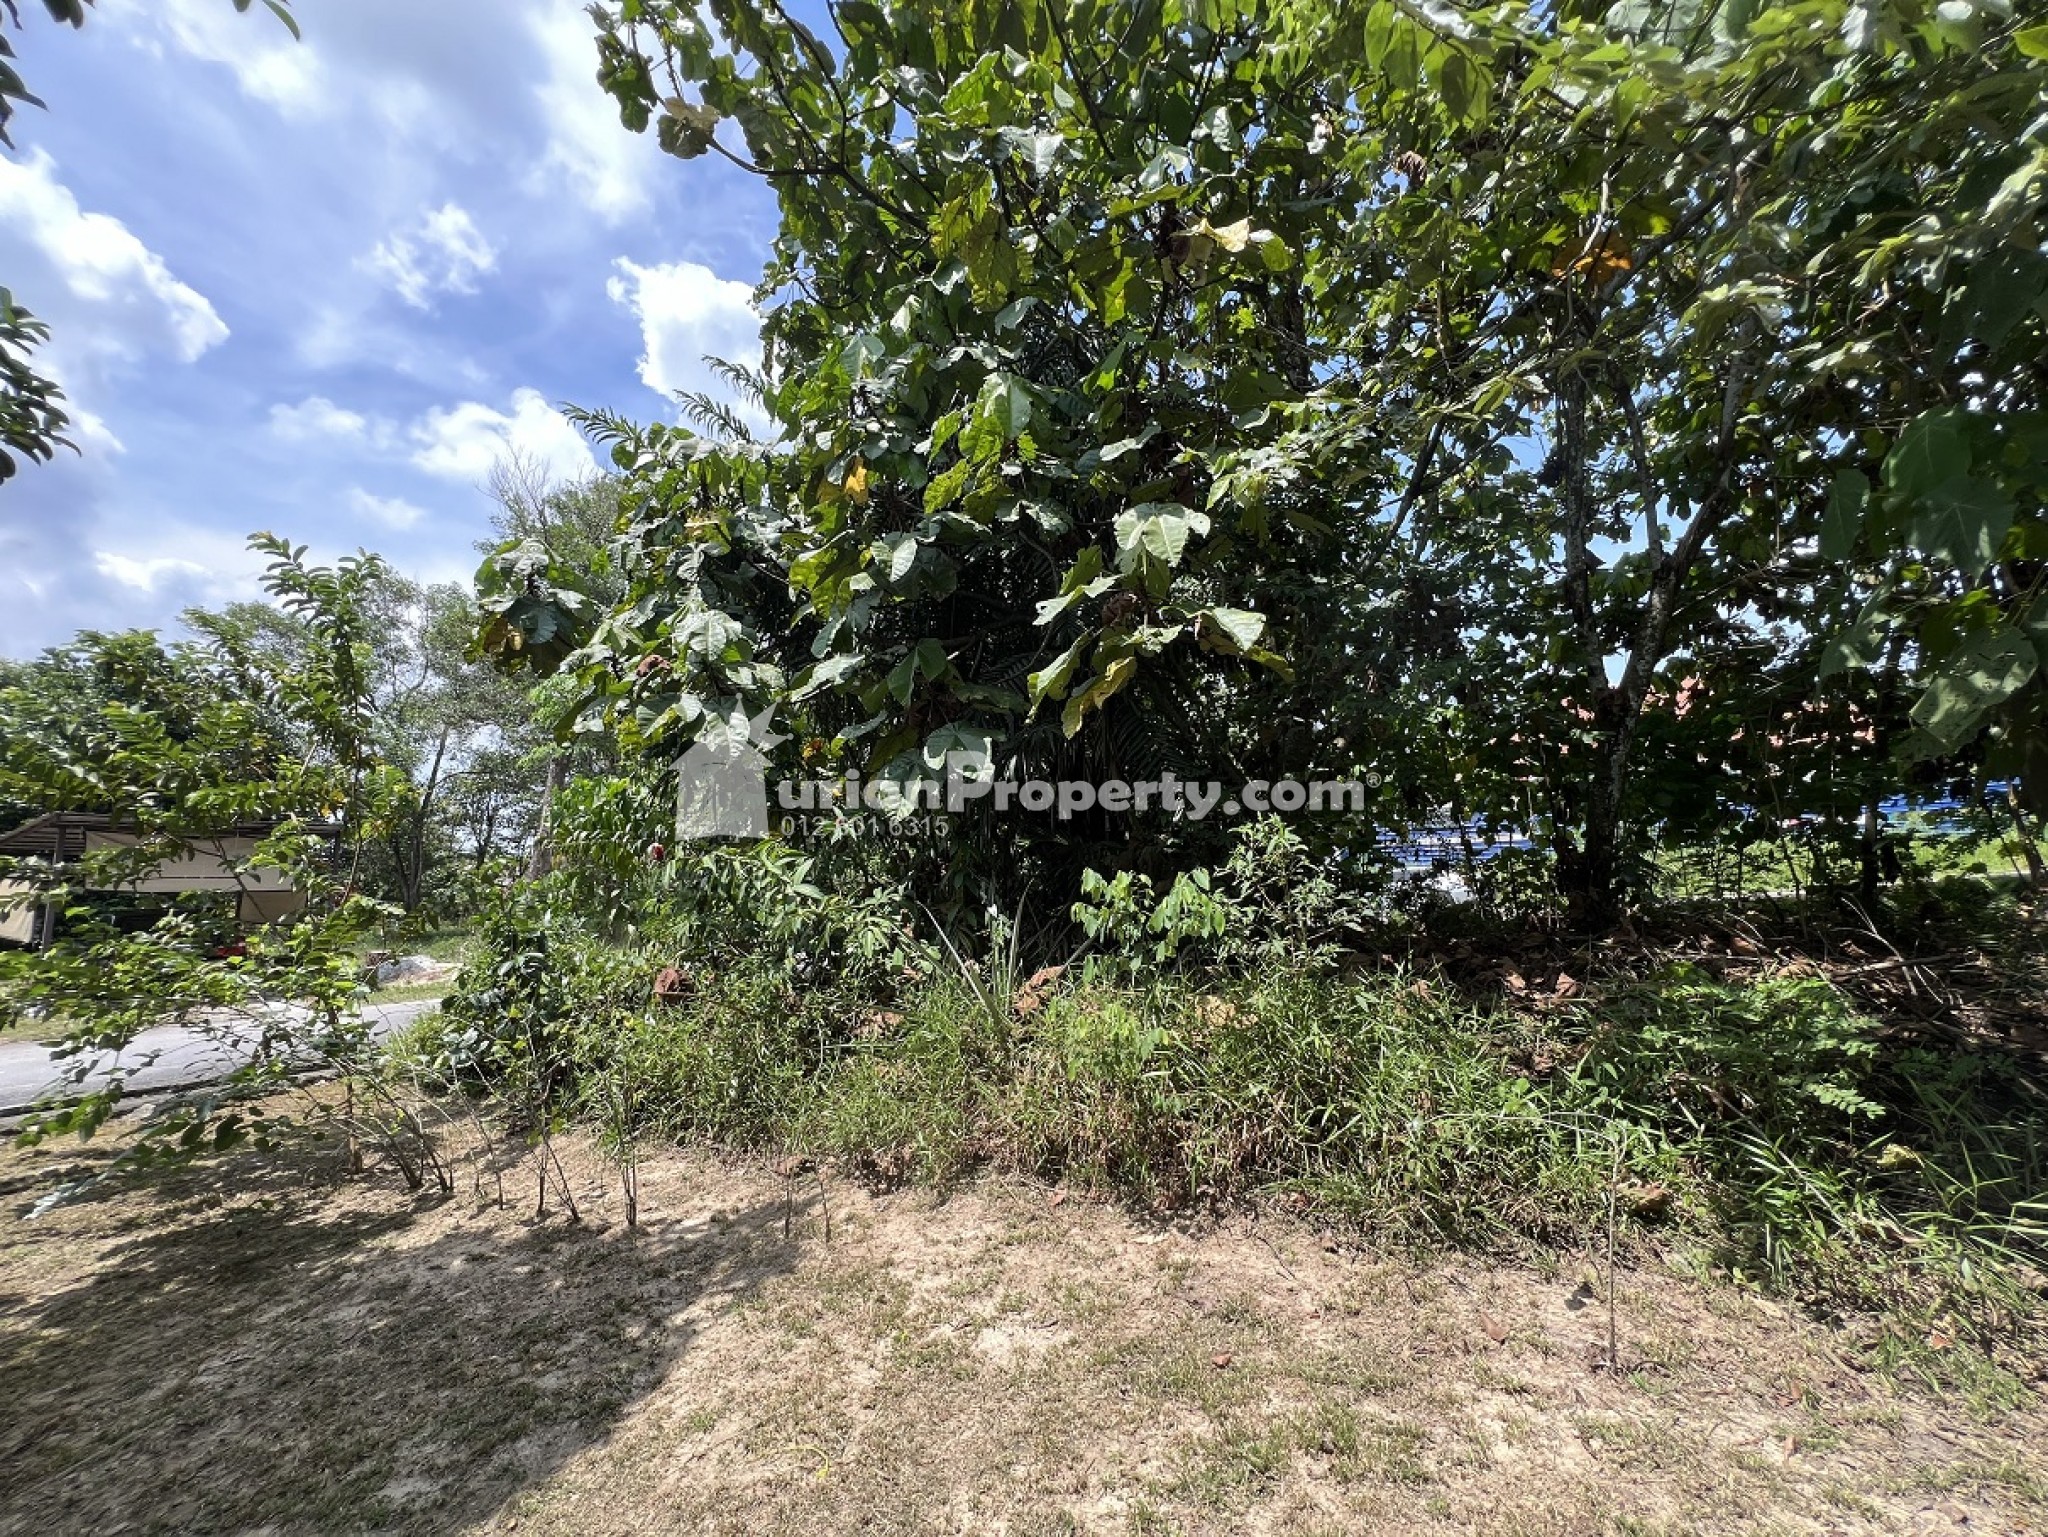 Bungalow Land For Sale at Sungai Buloh Country Resort